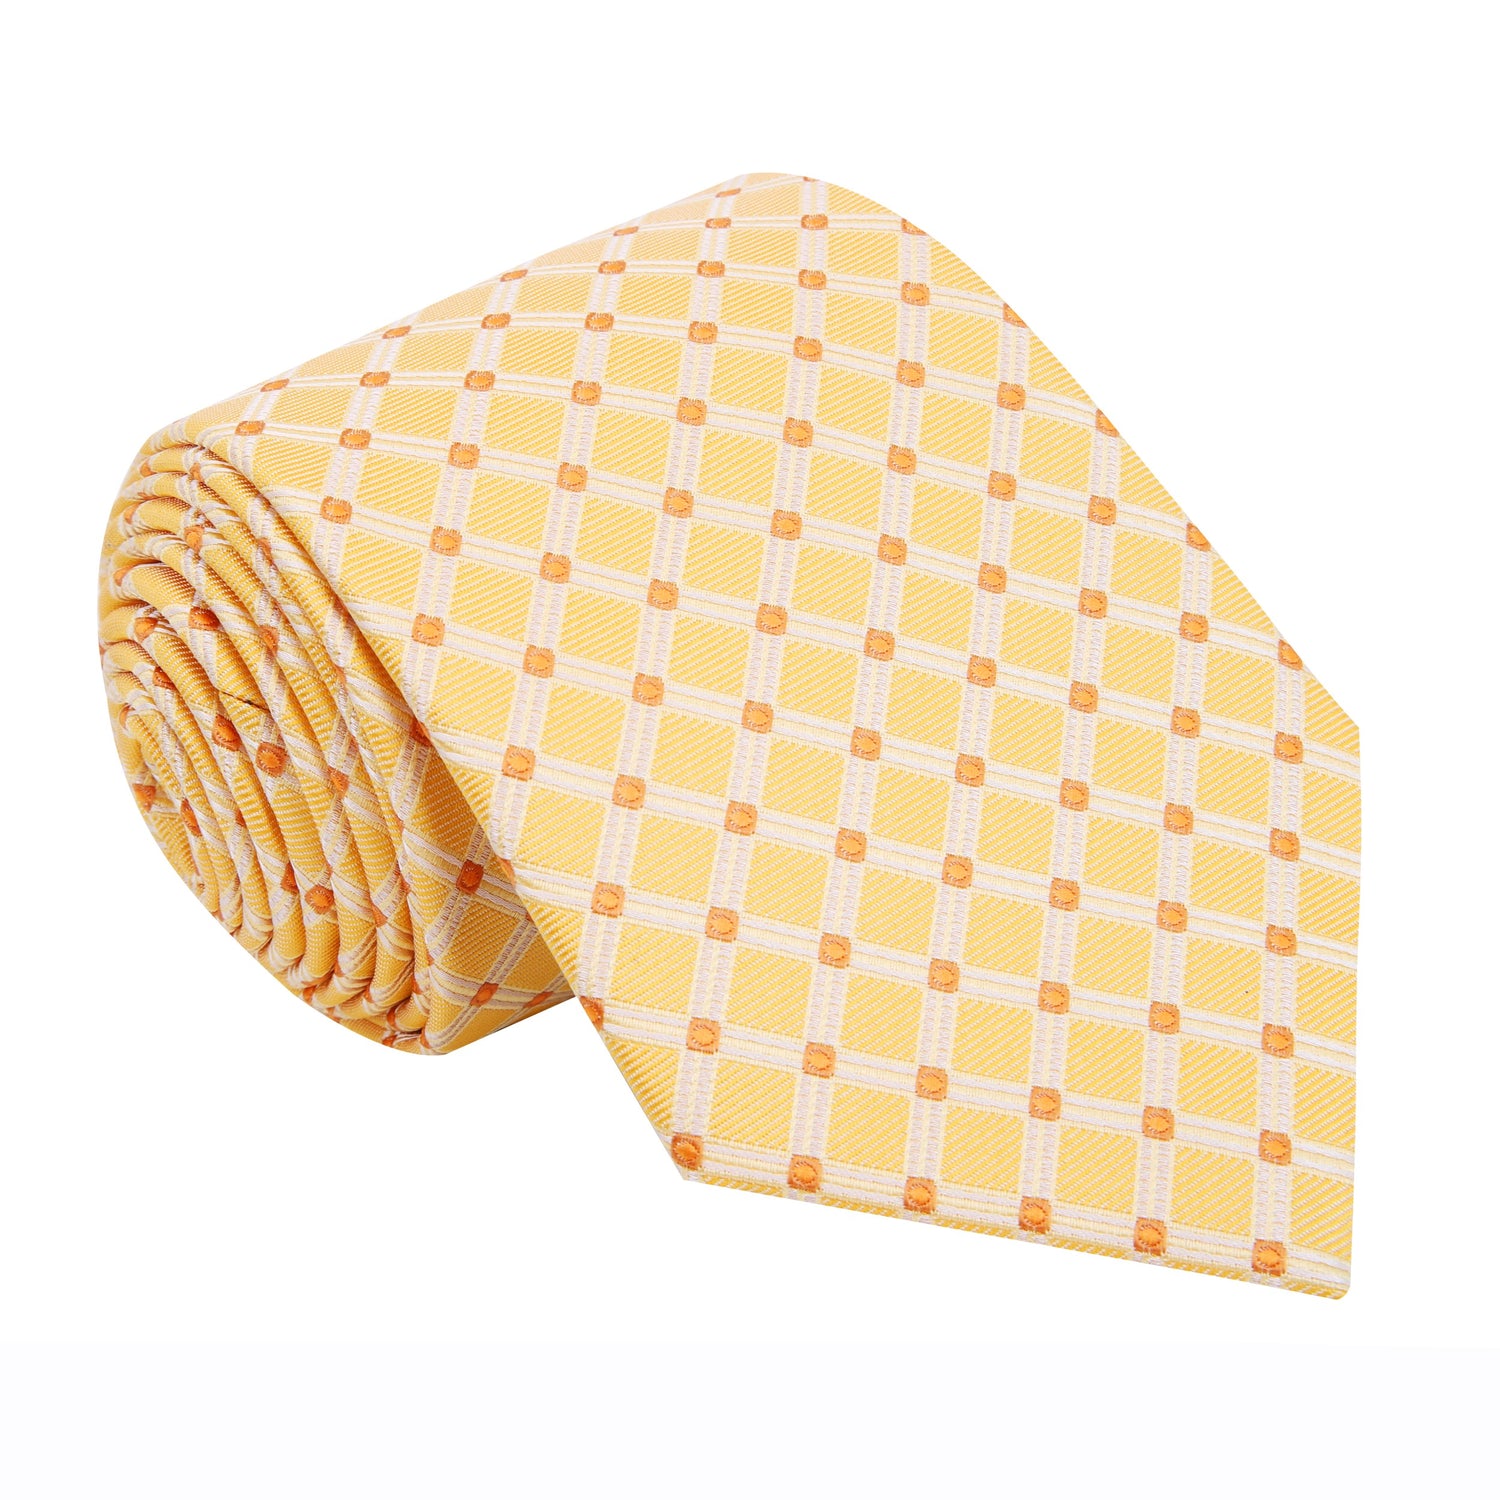 A Yellow Gold, Amber Geometric Diamond With Small Check Pattern Silk Necktie 